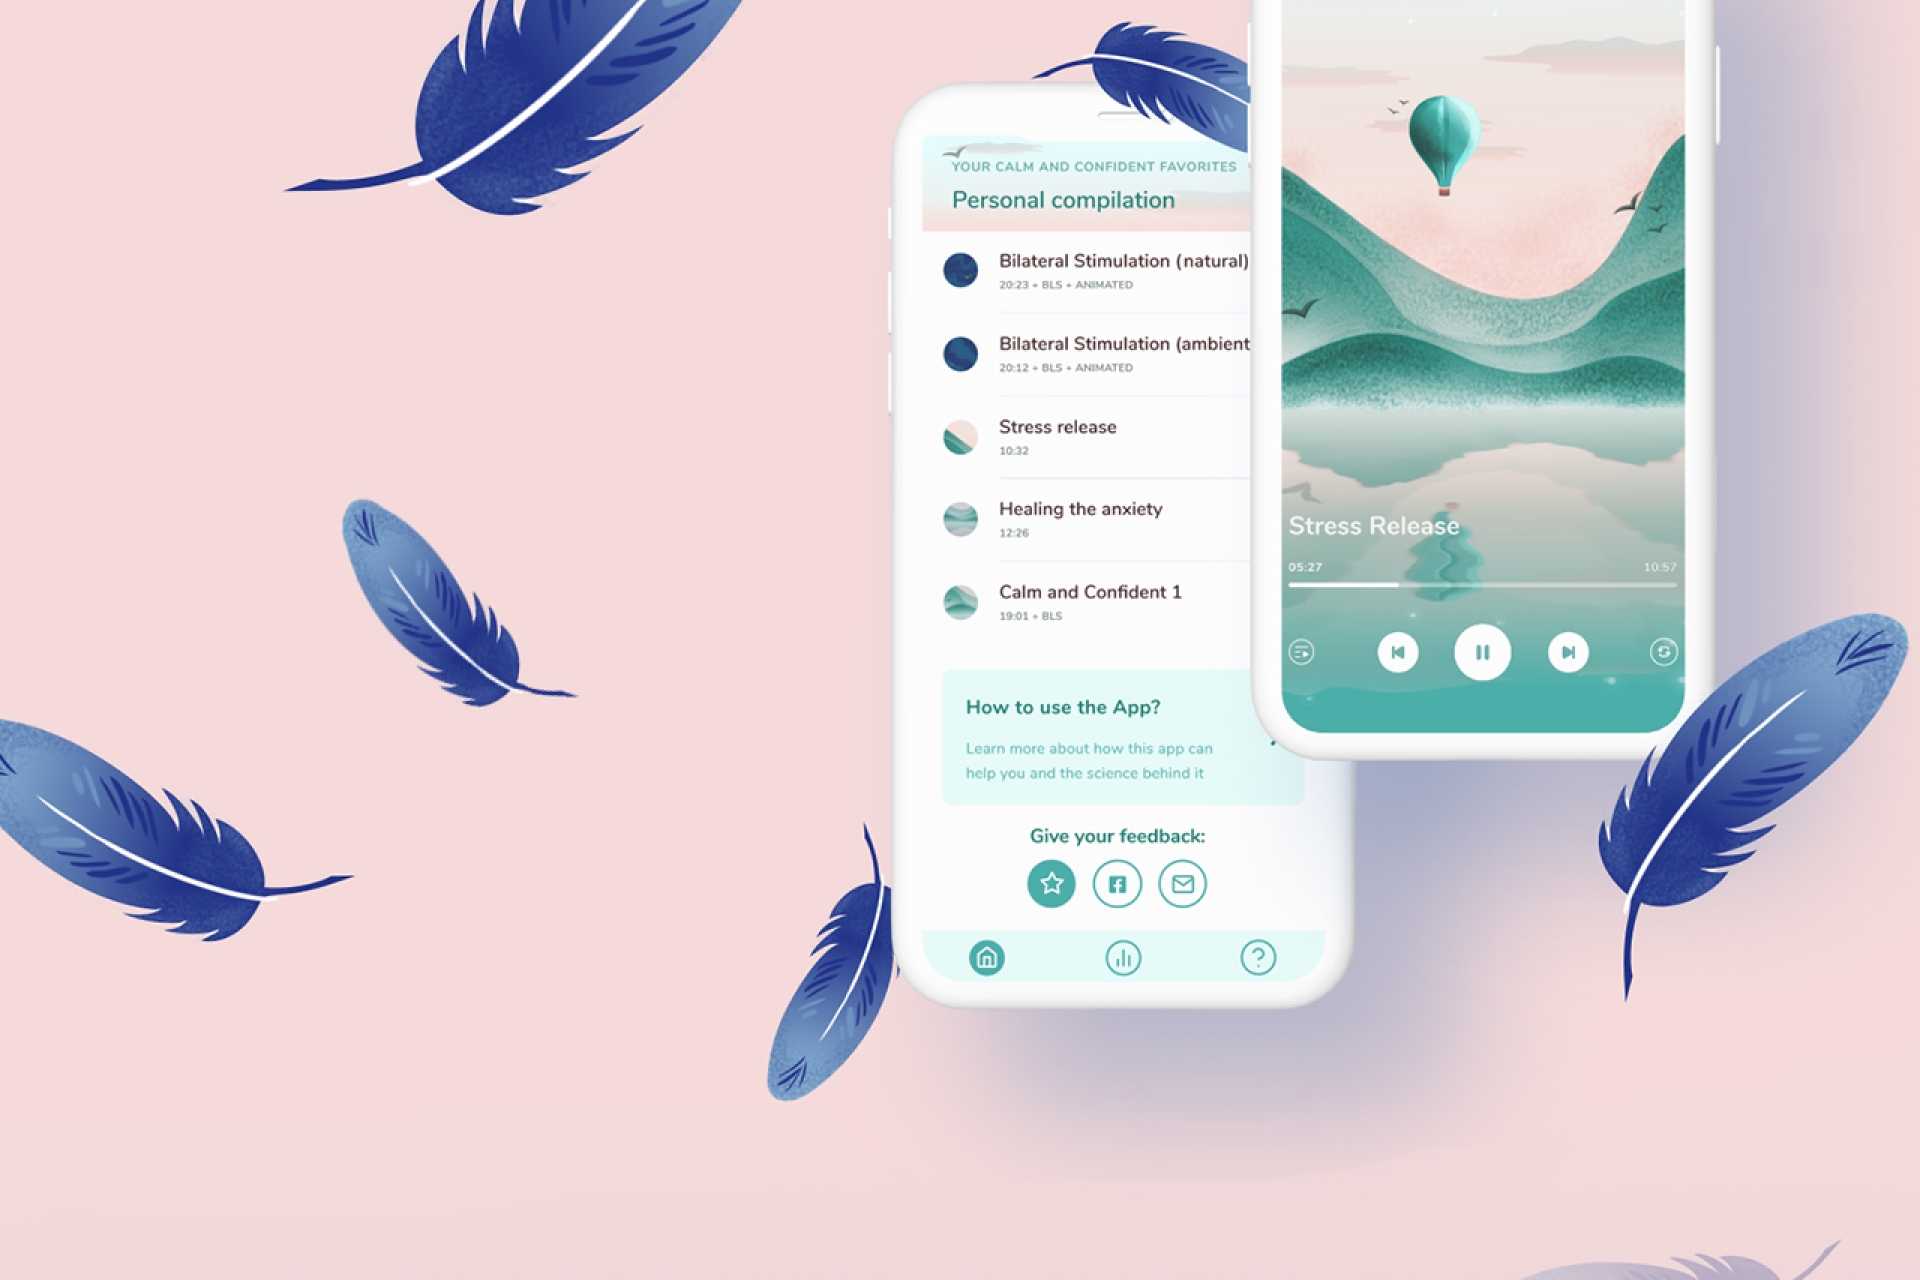 A mobile app to help the users to feel calm based on EMDR